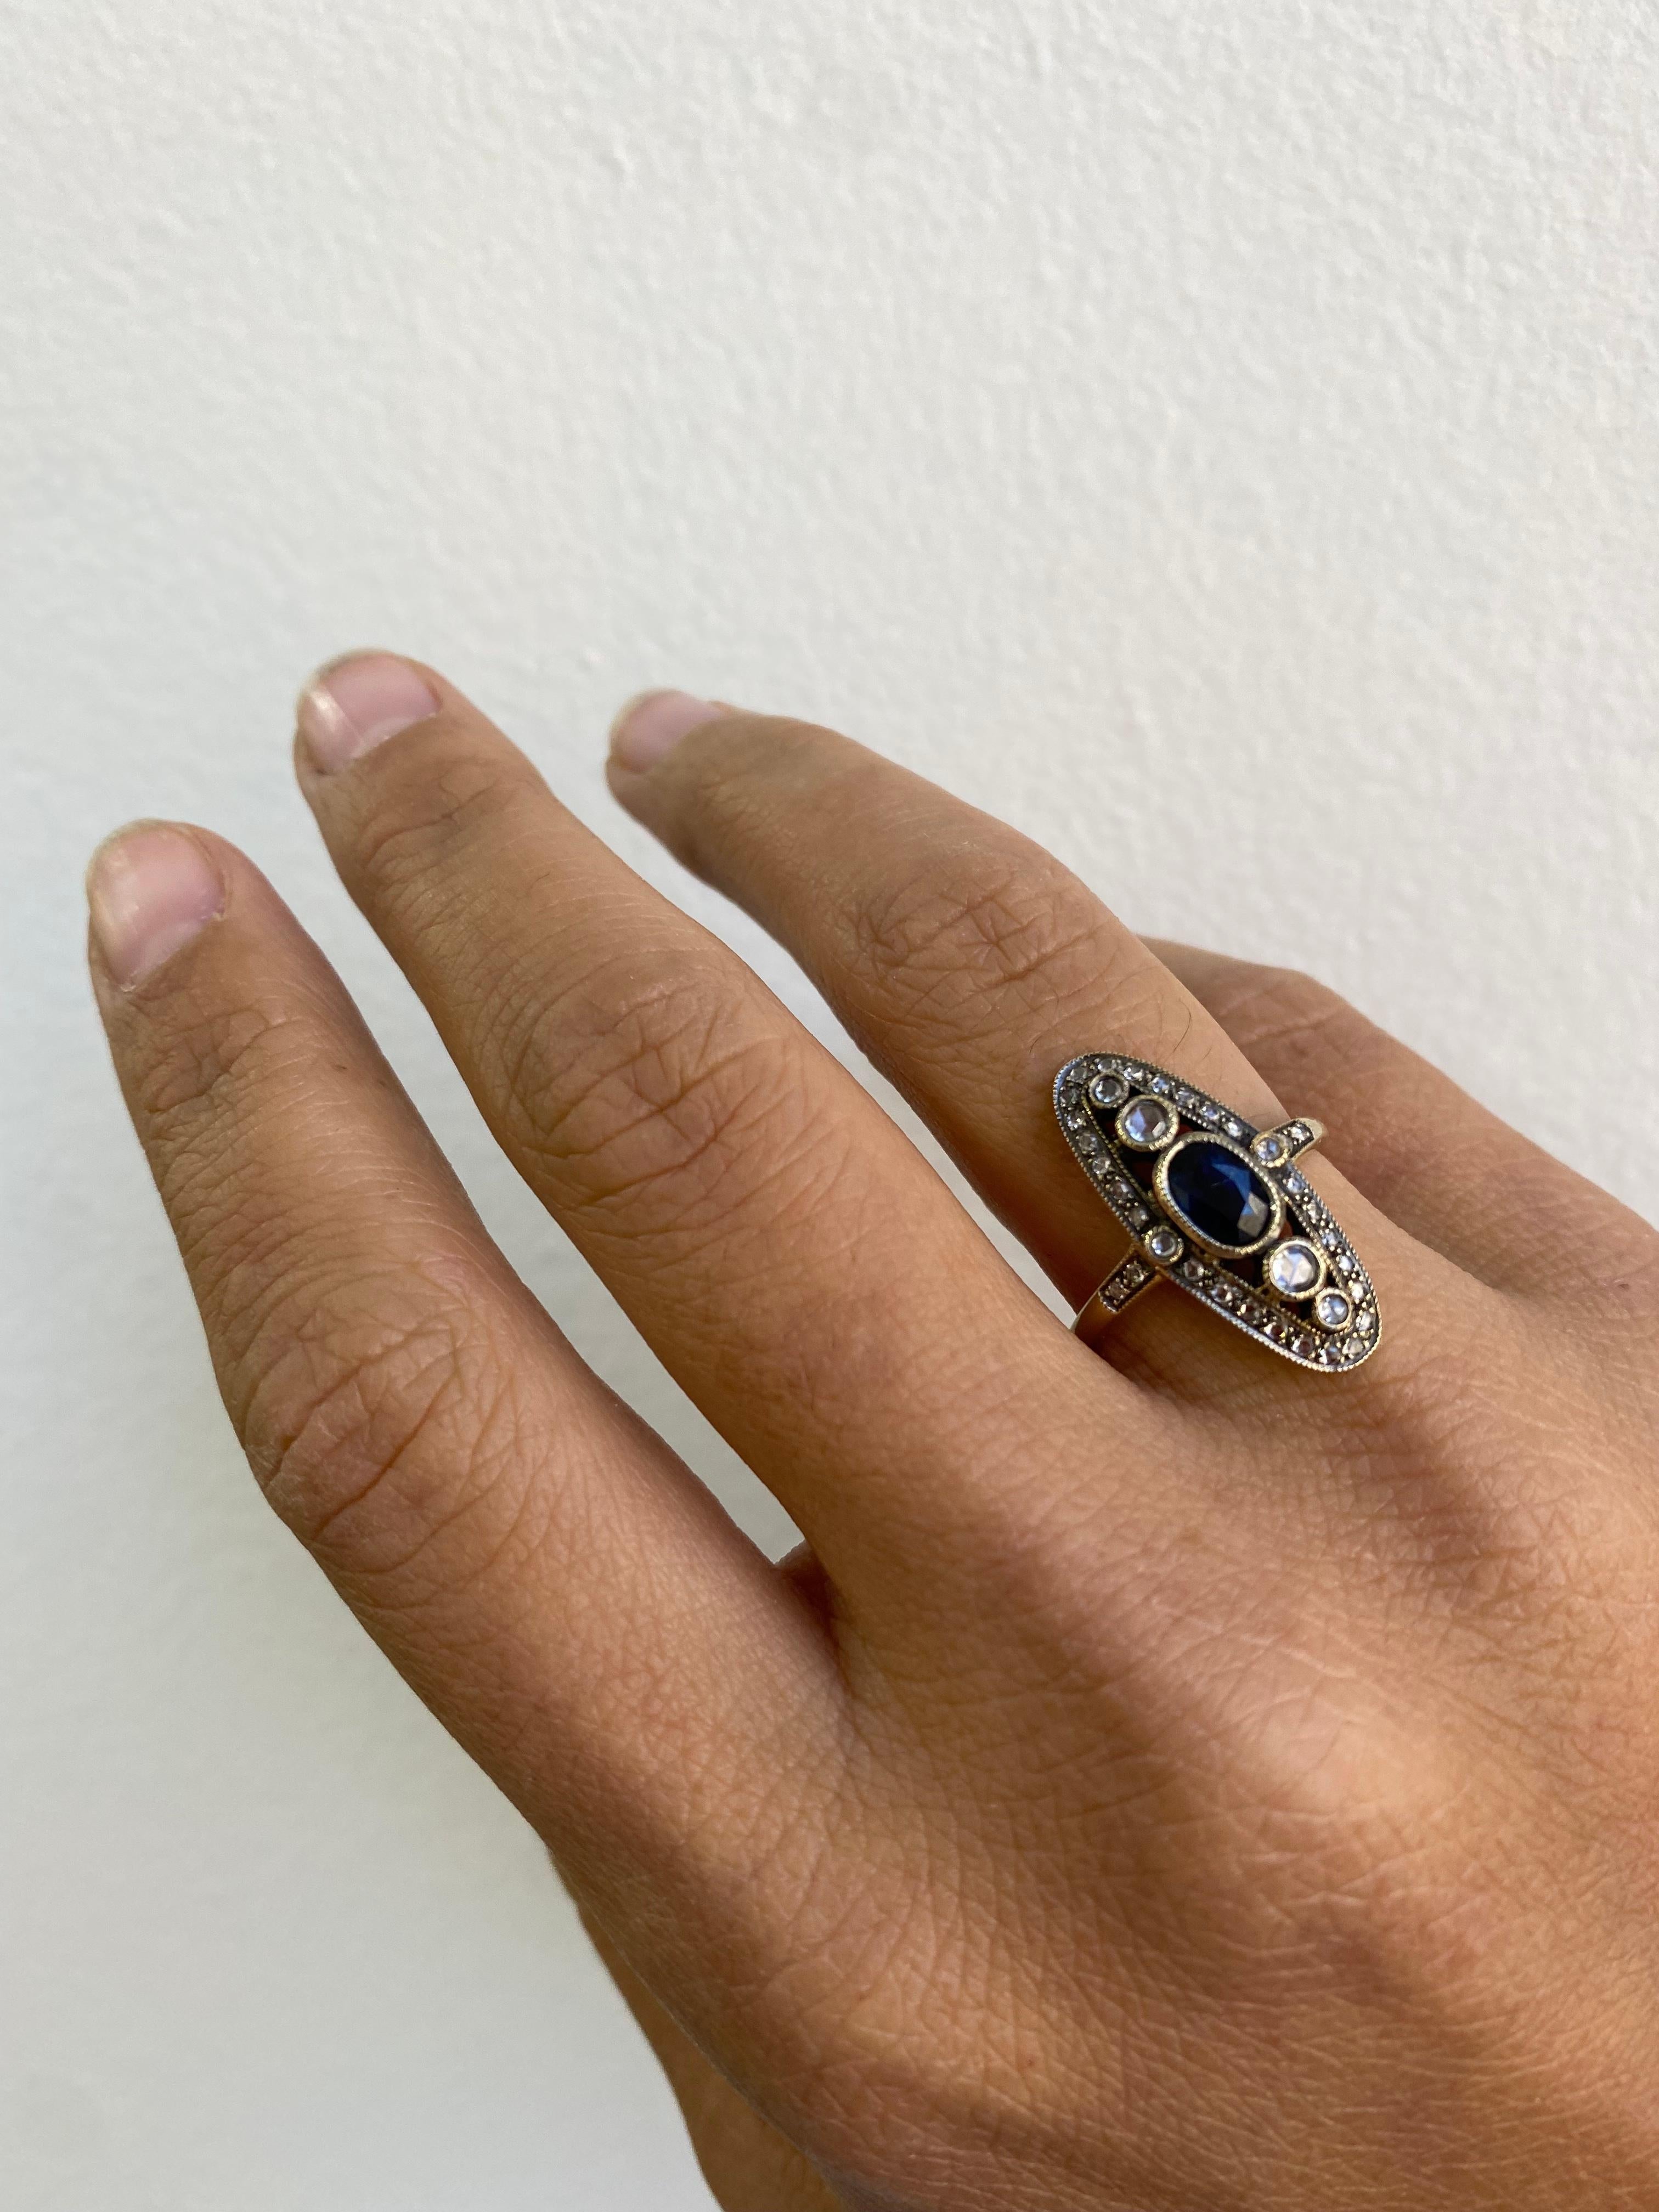 Blue sapphire long oval ring with diamonds 

This elegant Art Deco revival features a 0.75 carat oval shape blue sapphire center, accented with gold bezeled rose cut diamonds, and micro pave round brilliant cut diamonds. Crafted in 18k white and